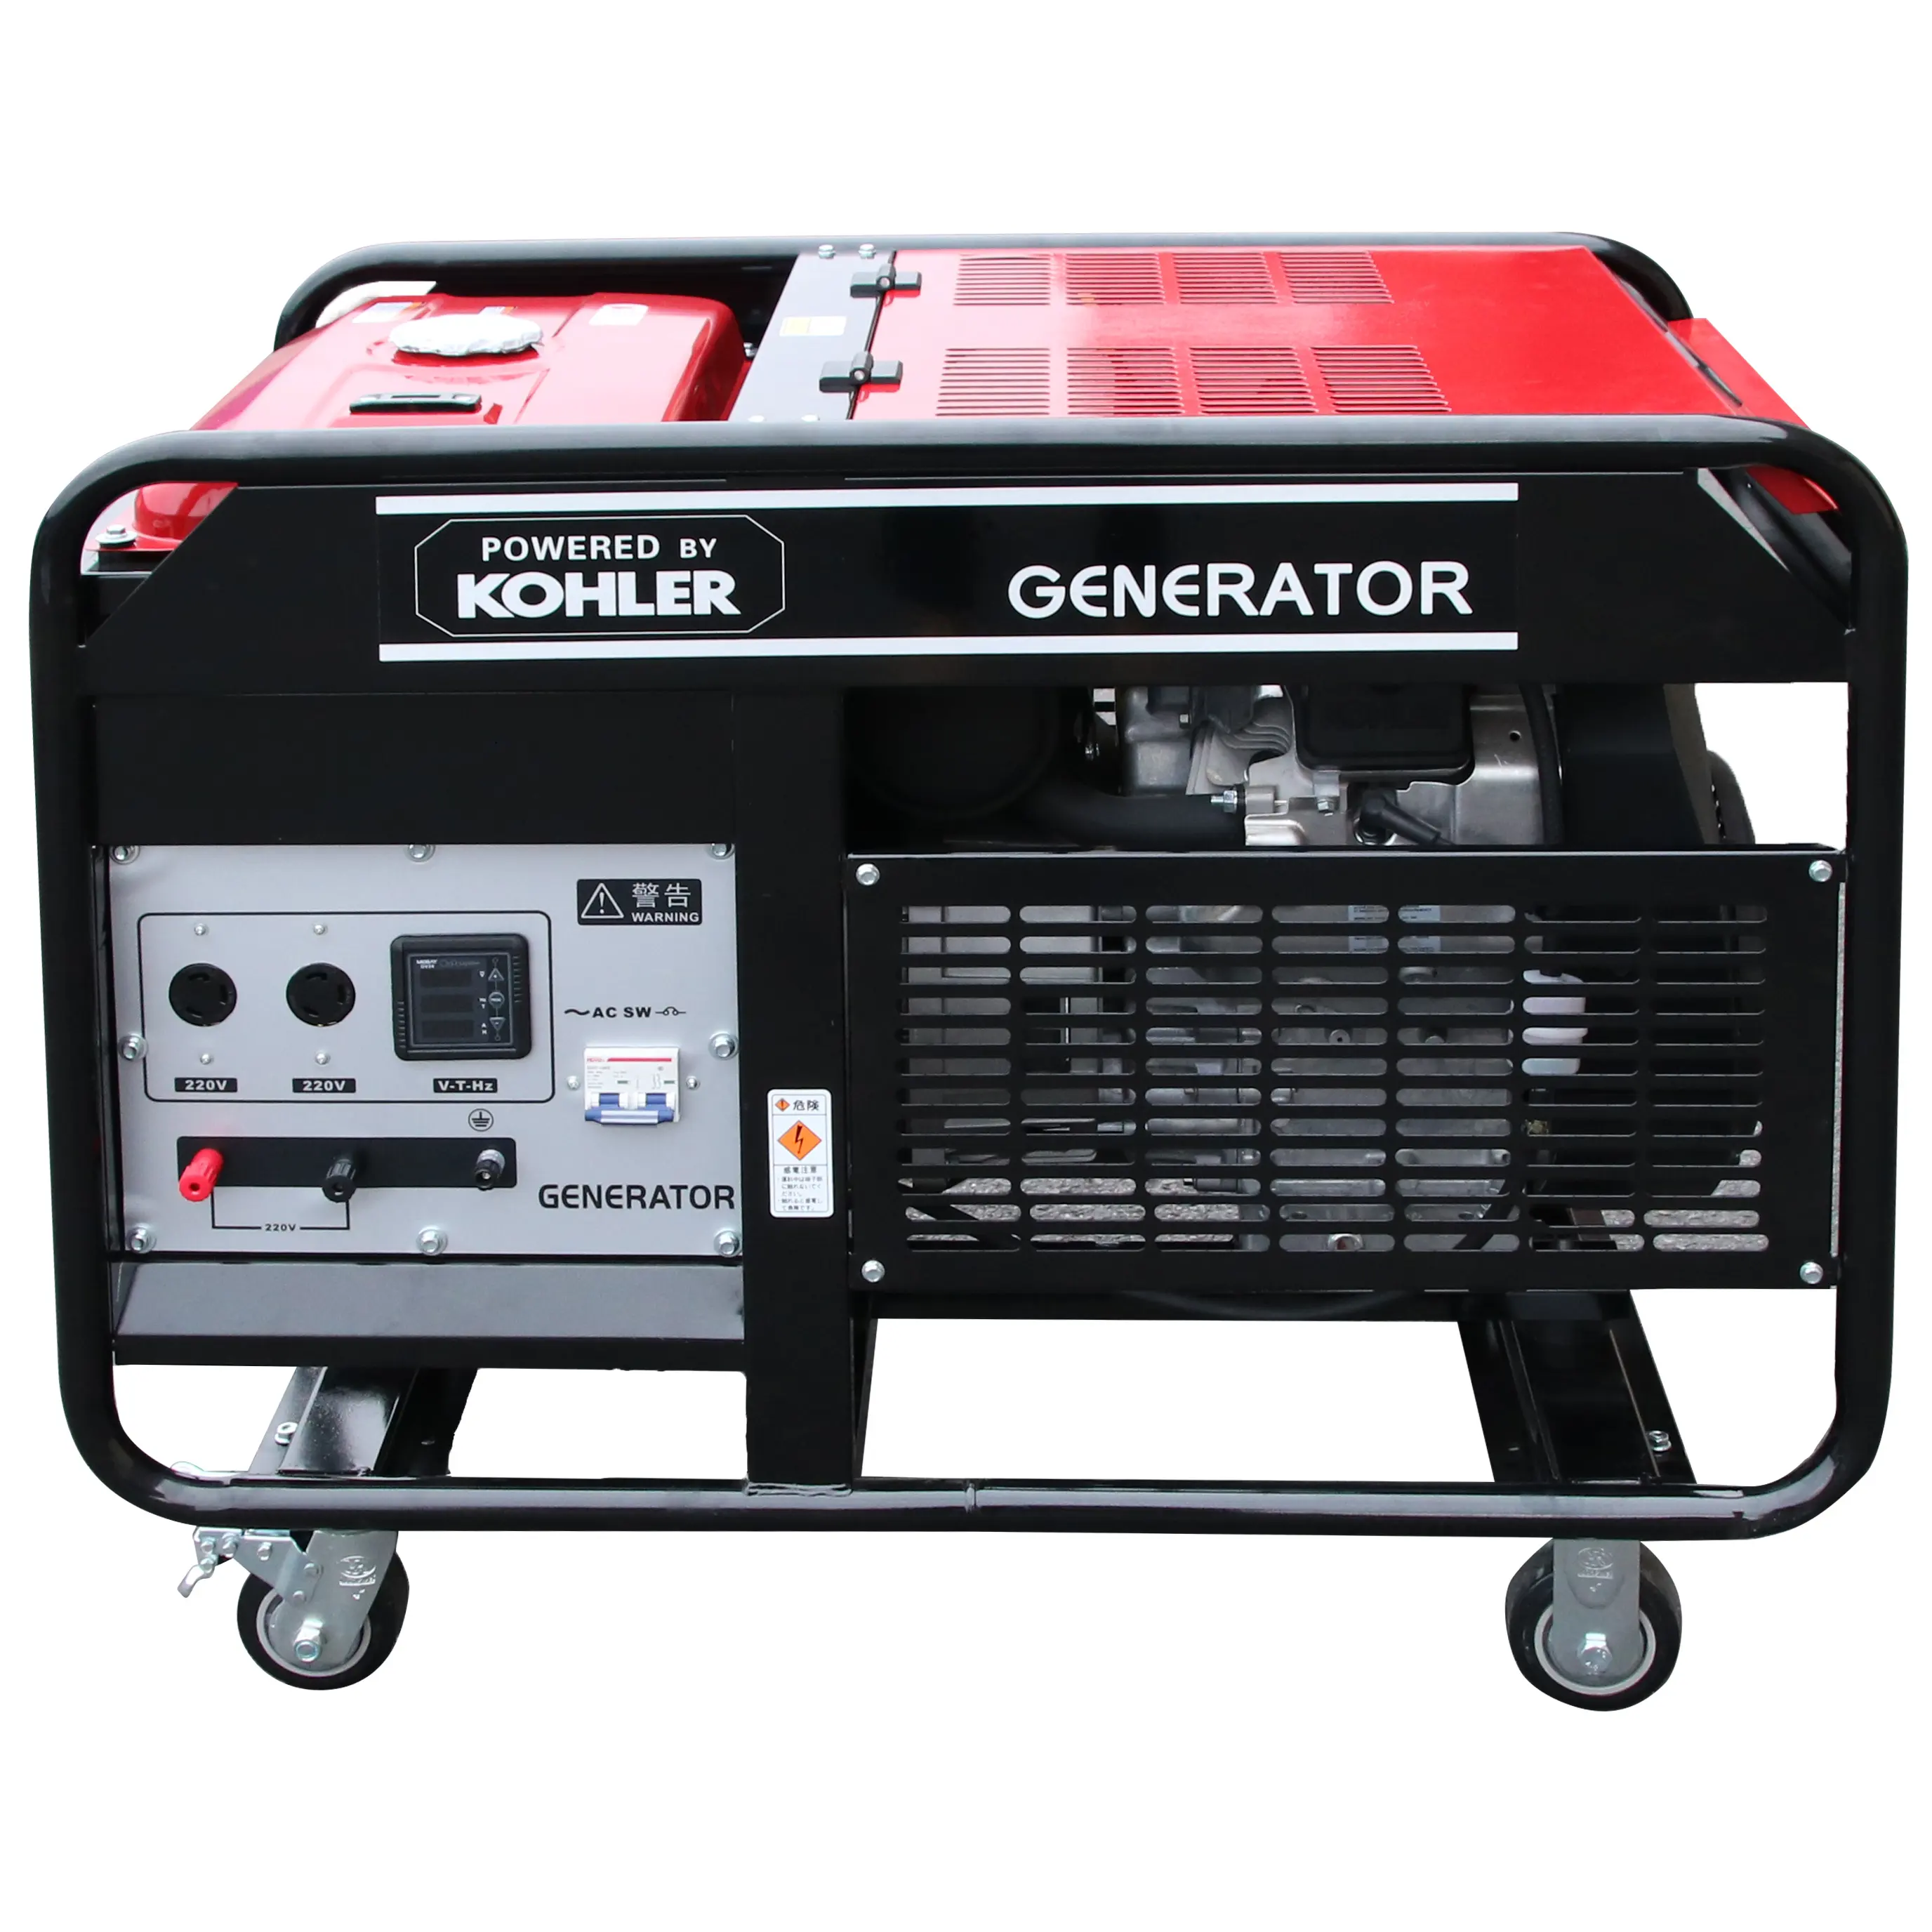 10KW single phase electric start generator for gx630 engine powered